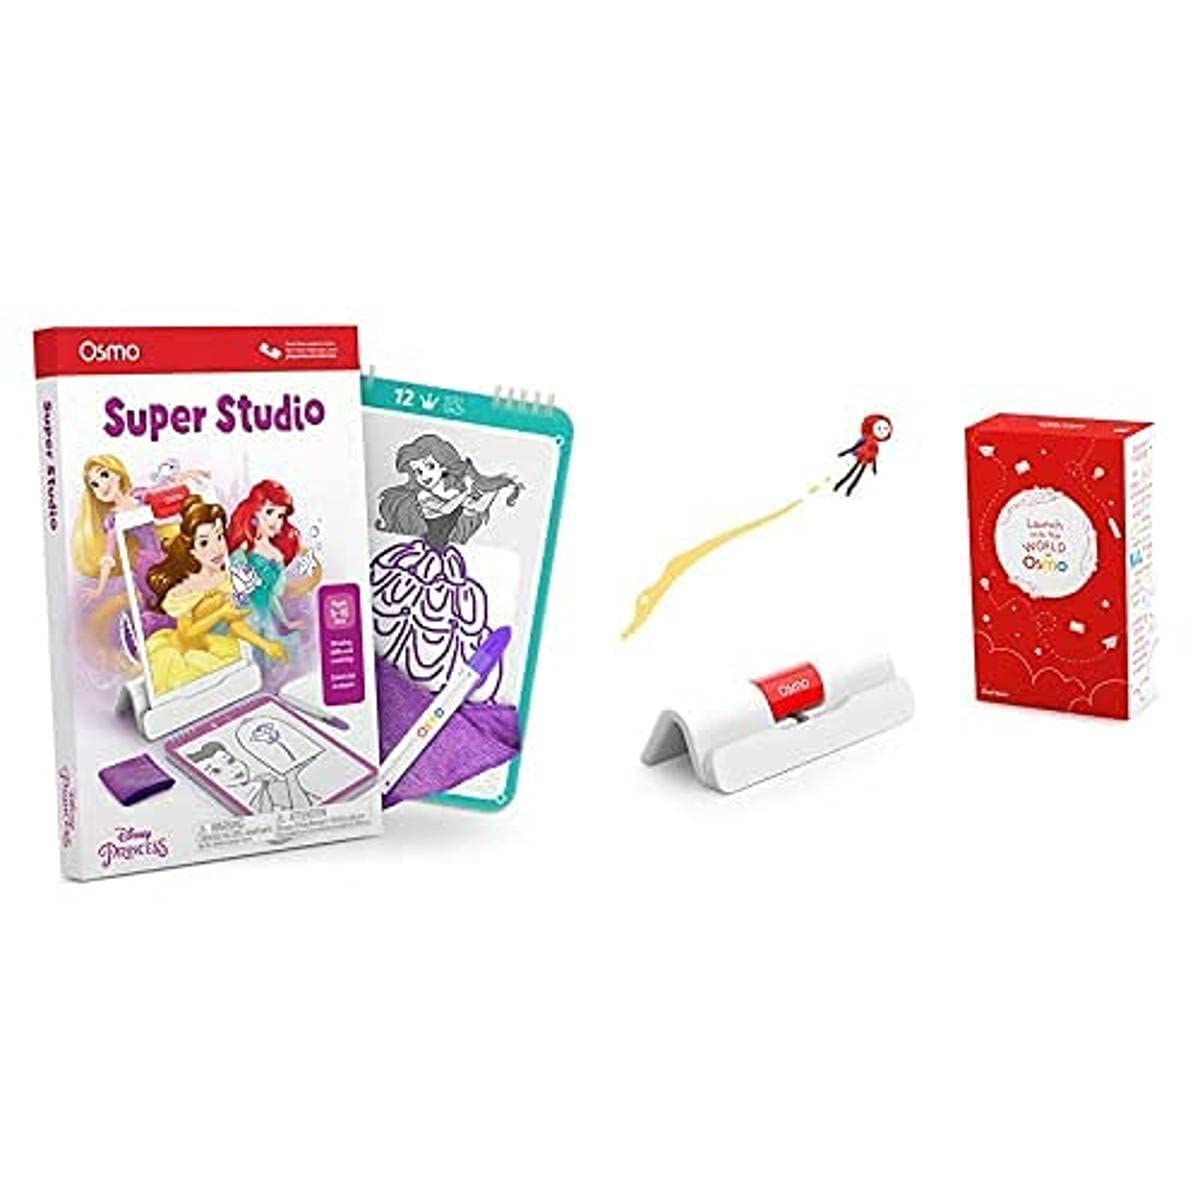 Osmo - Super Studio Disney Princess Game - Ages 5-11 - Learn to Draw - For iPad or Fire Tablet (Osmo Base Required), Multicolor (902-00008)